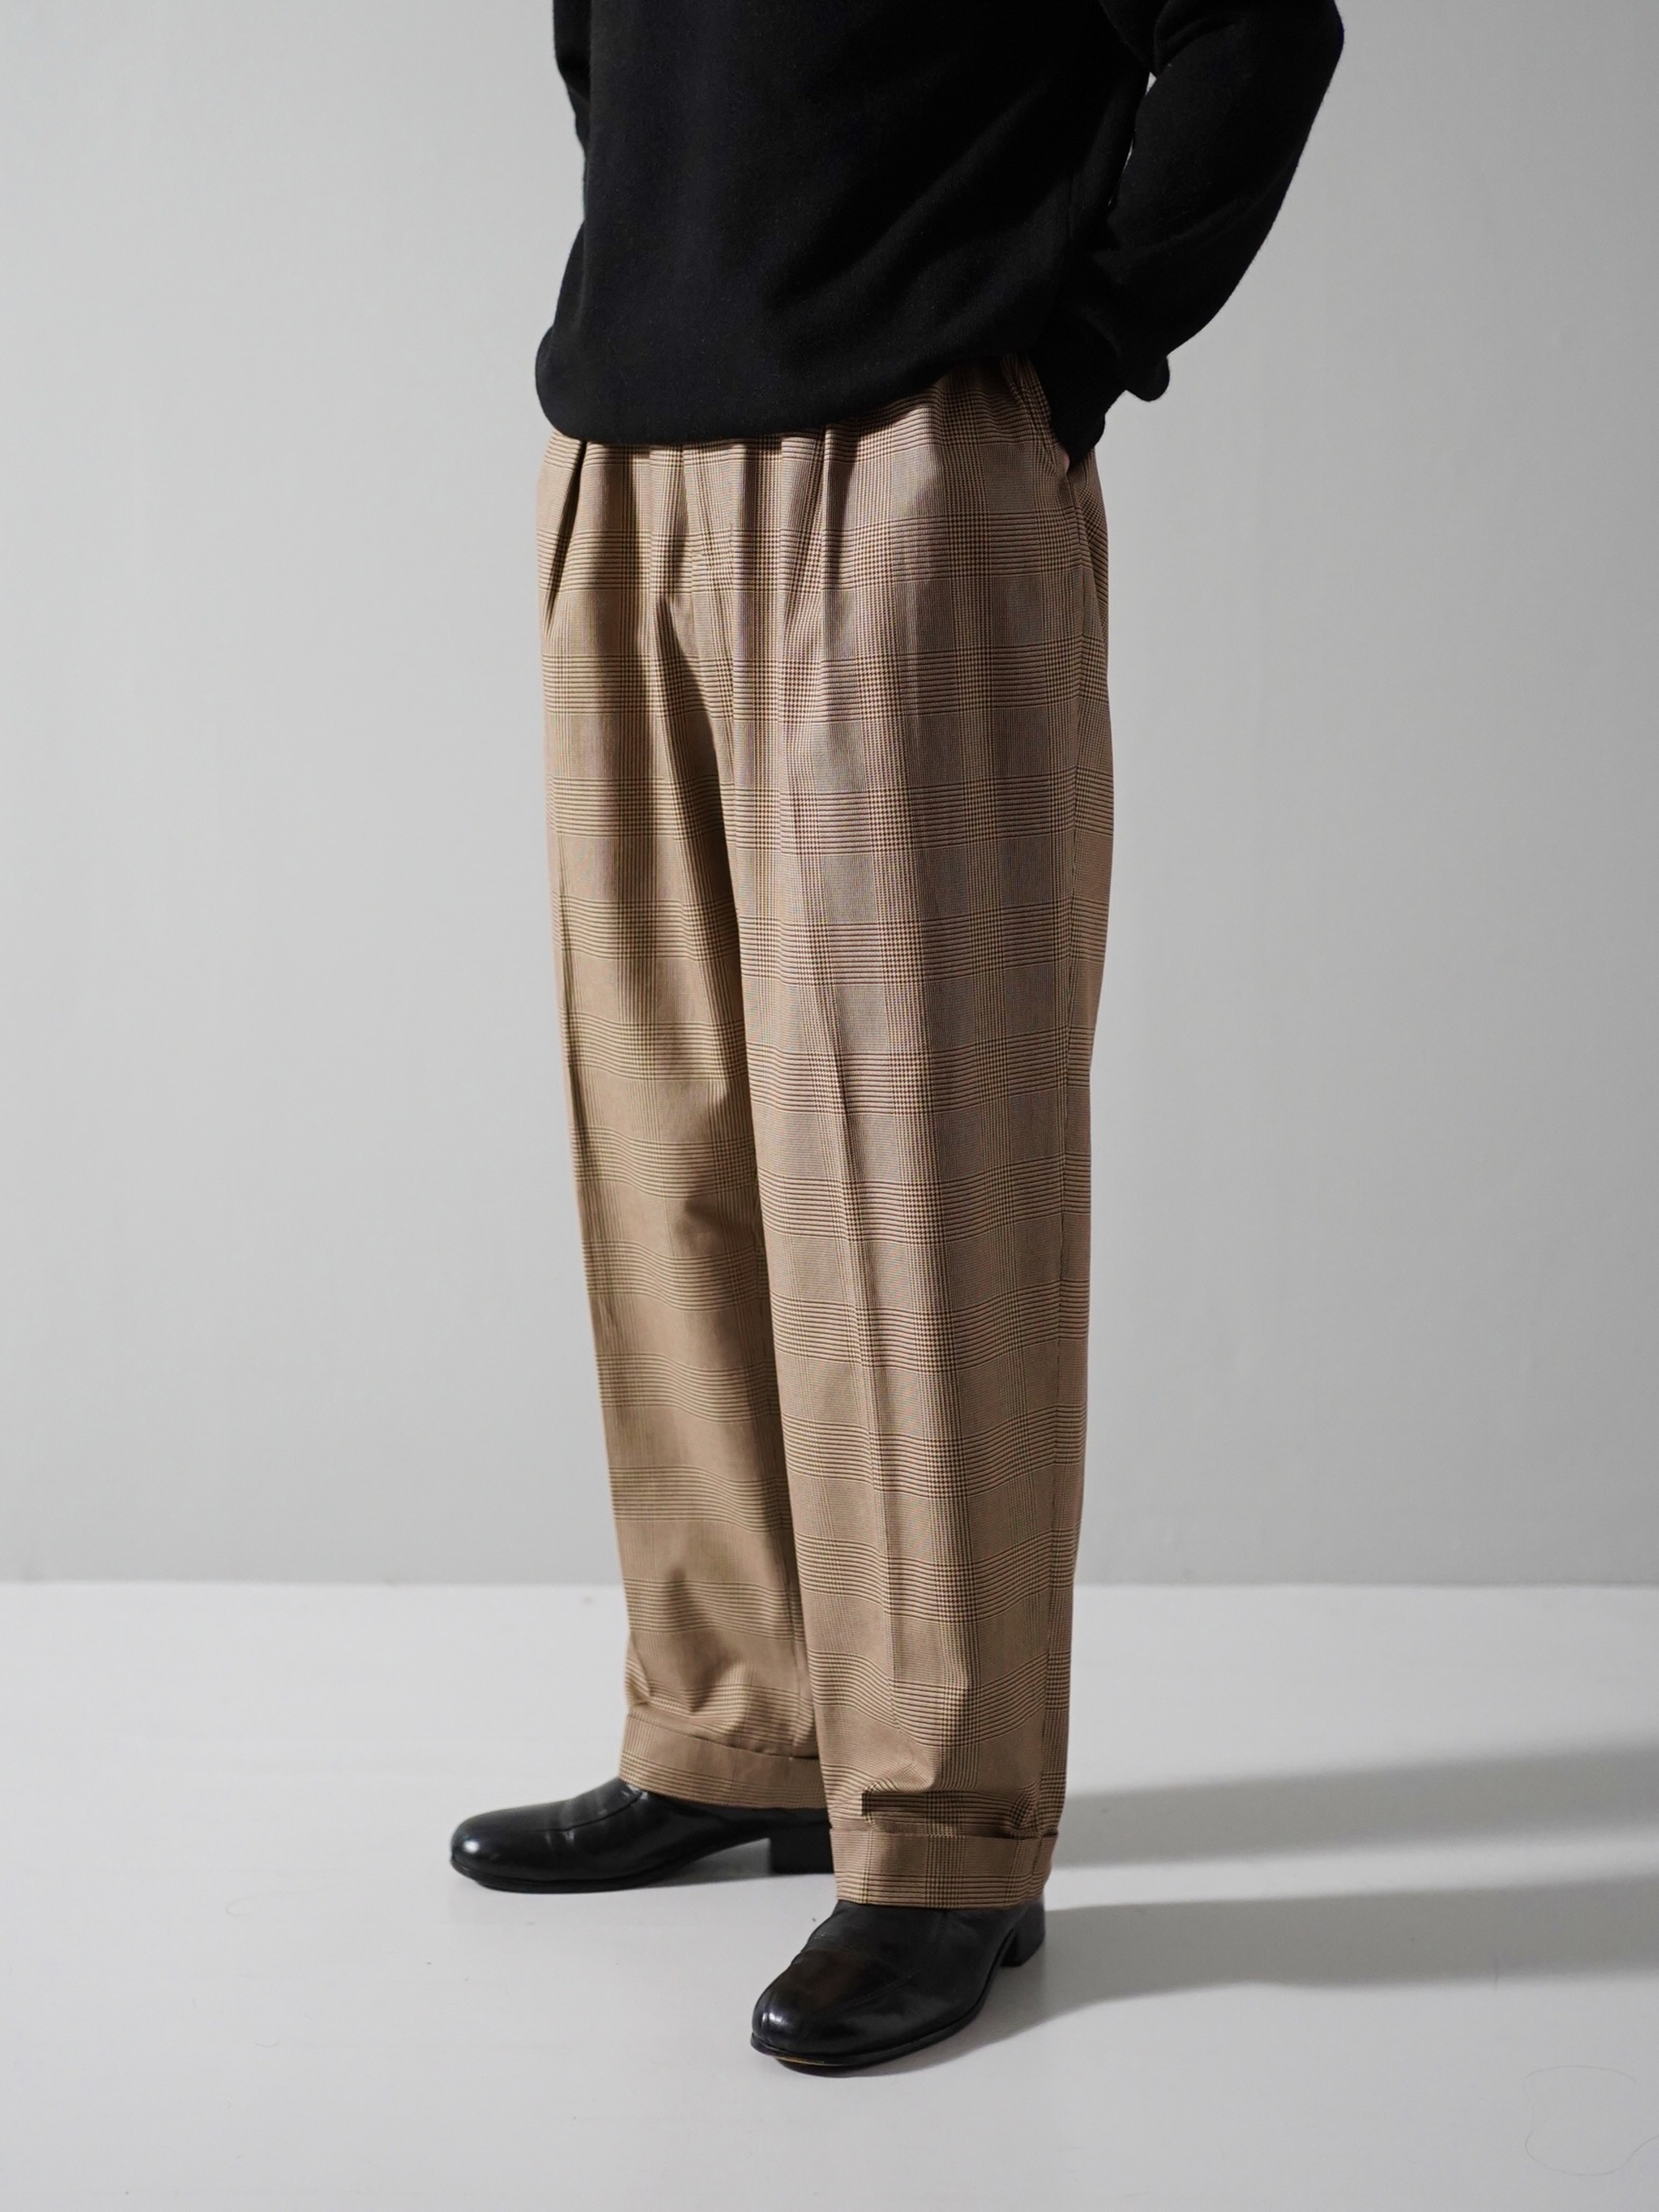 1990's Polo by Ralph Lauren Glen check 2tuck Cotton trousers